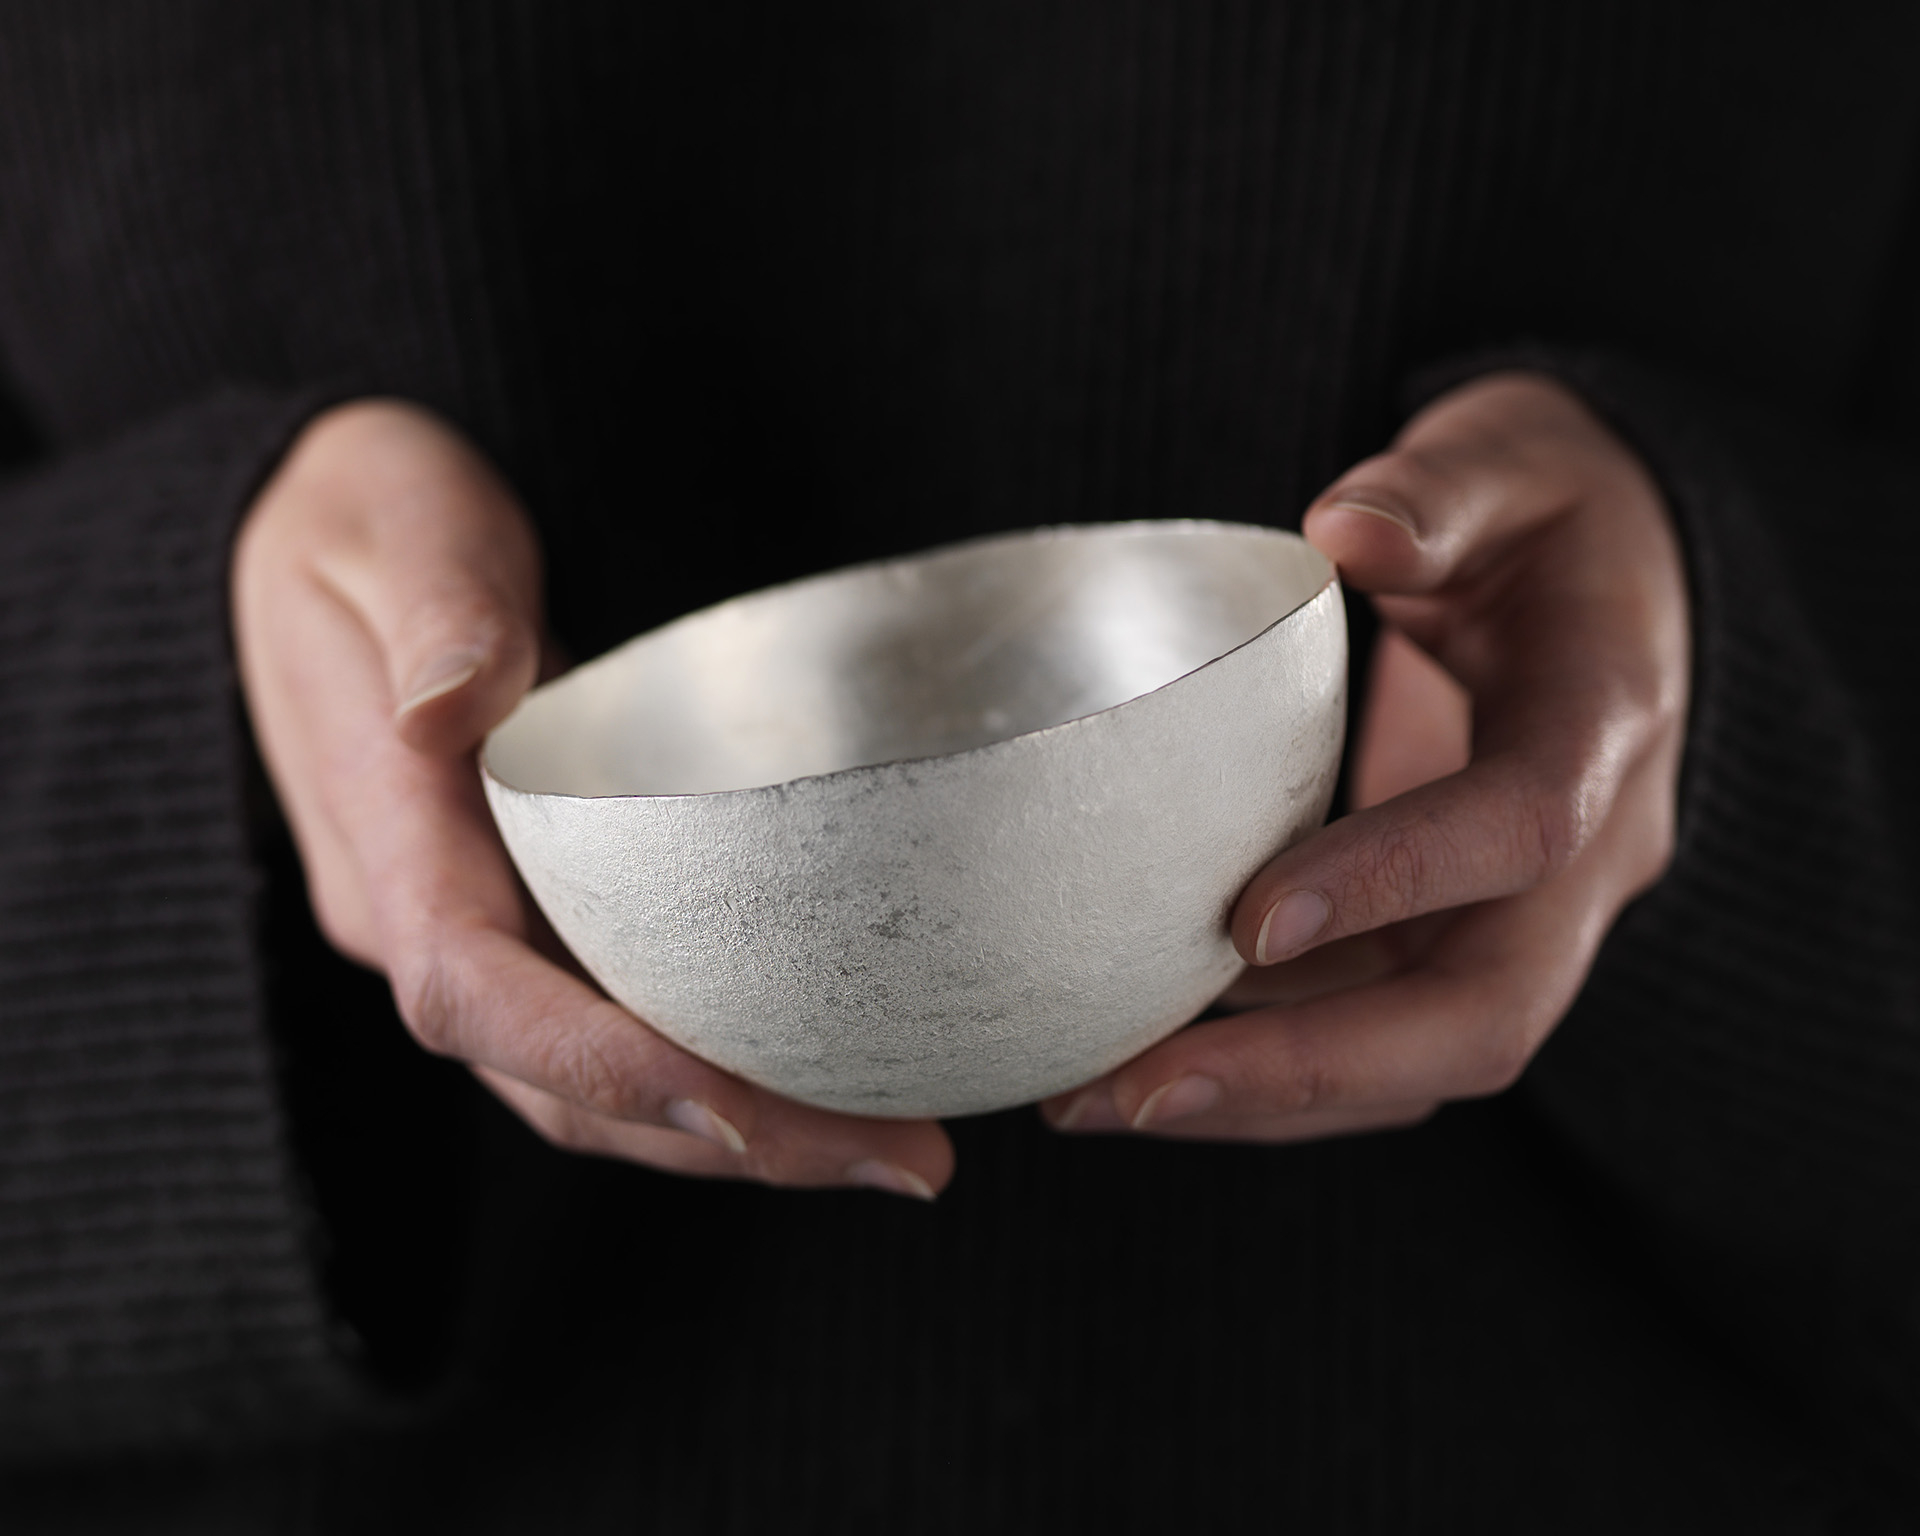 Image showing a silver bowl being held in a person's hands. The work is by Louisa Thomson, BA (Hons) Jewellery and Silversmithing